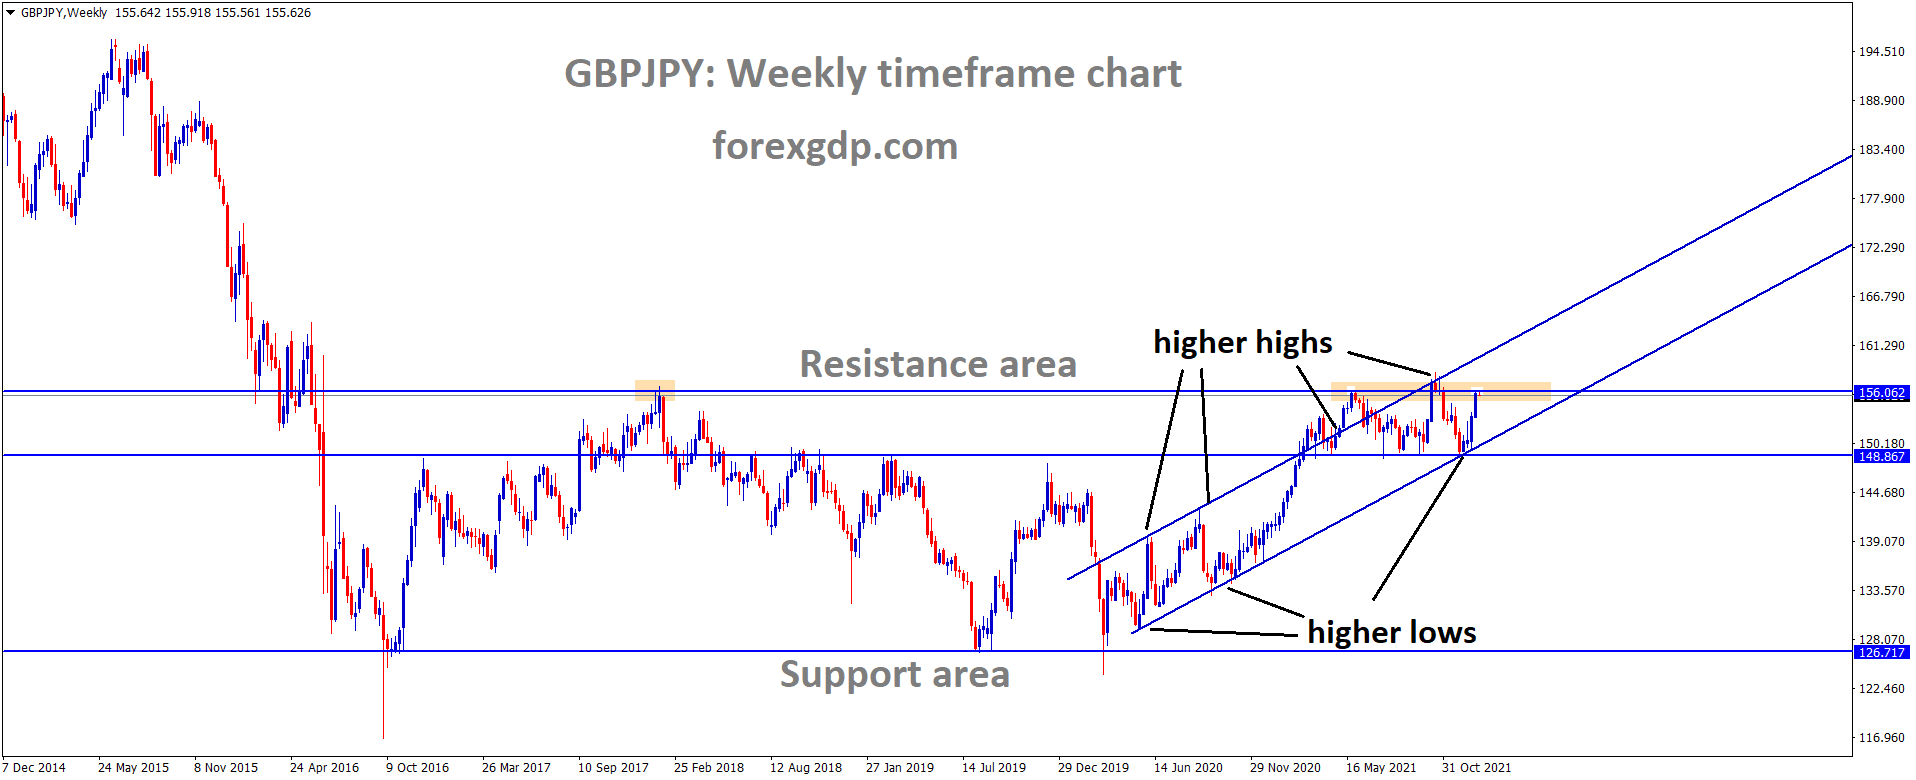 GBPJPY is moving in an Ascending channel and the market has reached the weekly resistance area of the channel